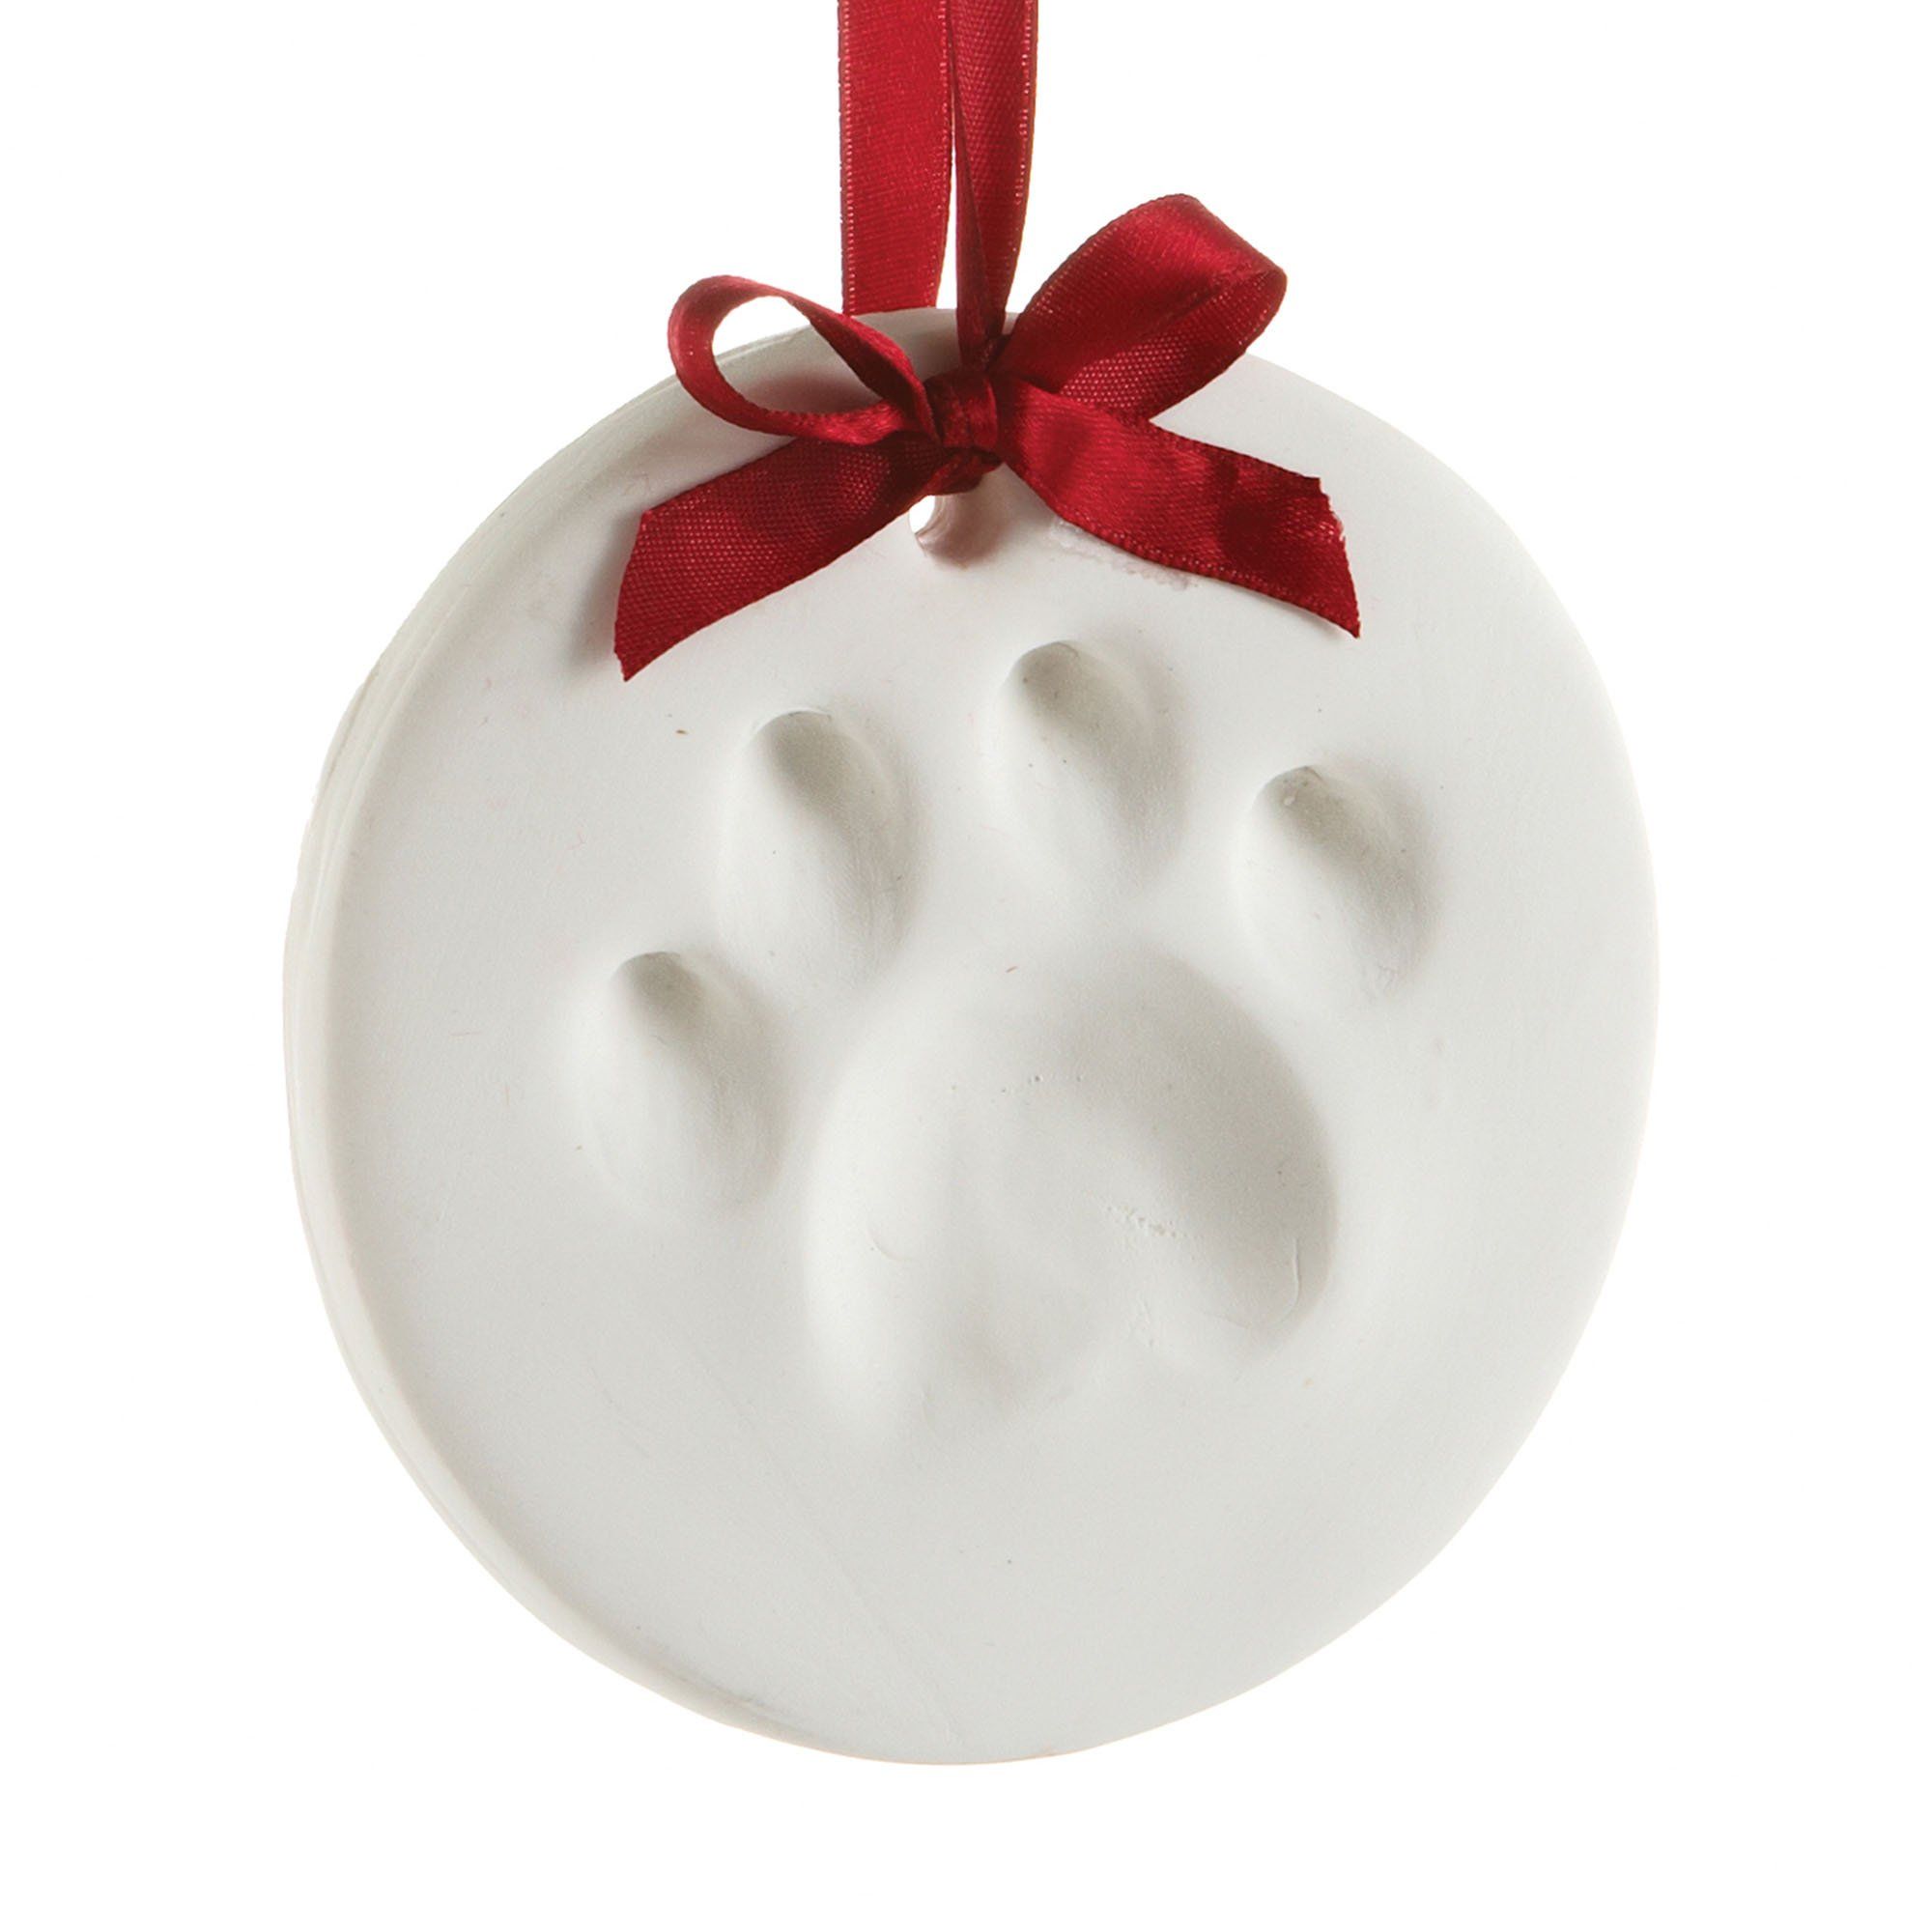 Pearhead Pawprints Holiday Ornament Impression Kit For Dogs or Cats | Petco | Petco